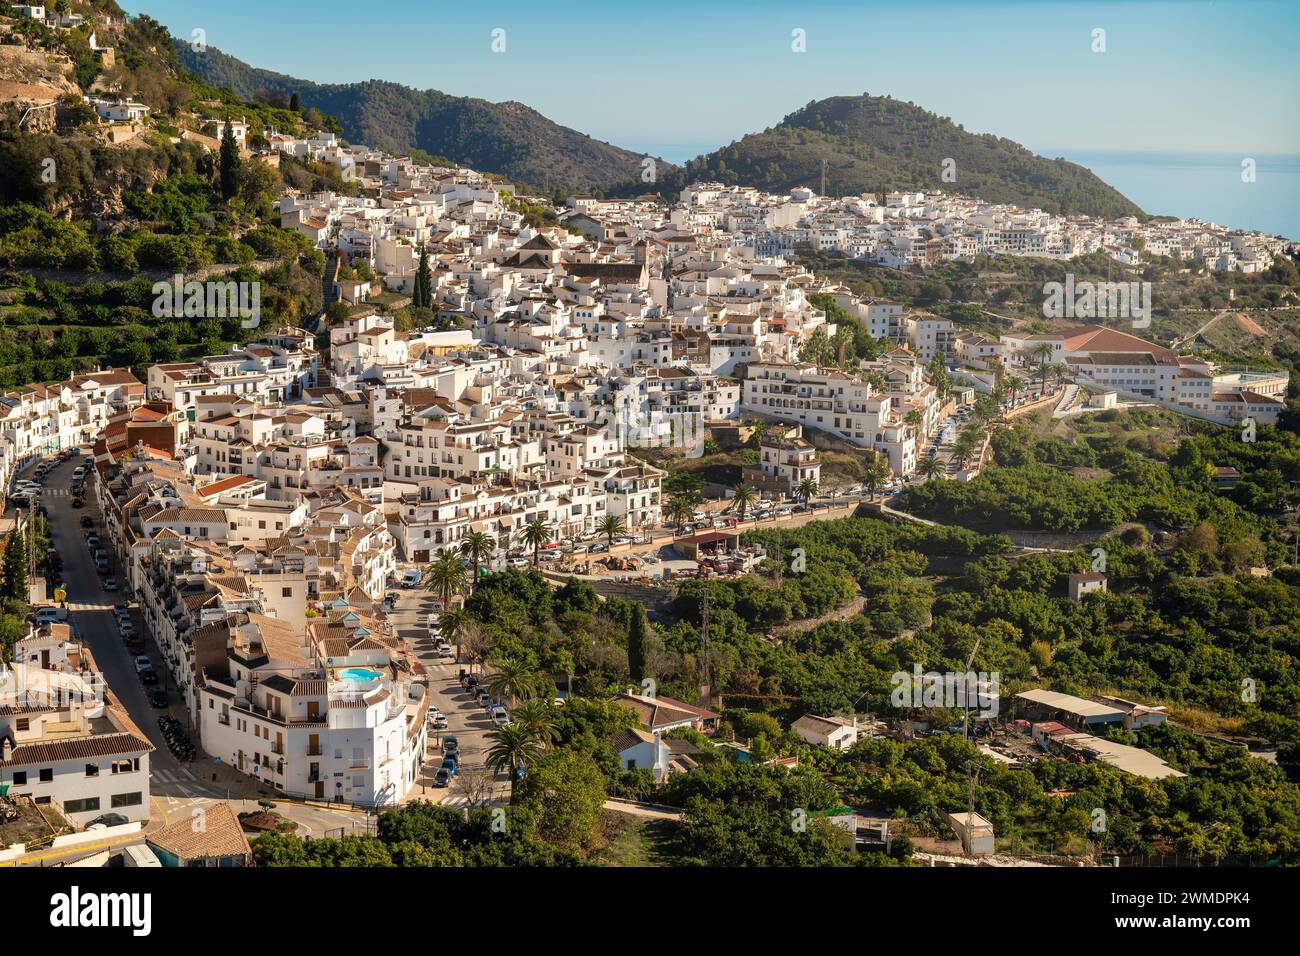 Cobblestone streets and white houses of Frigiliana dance in Andalusian charm. Stock Photo